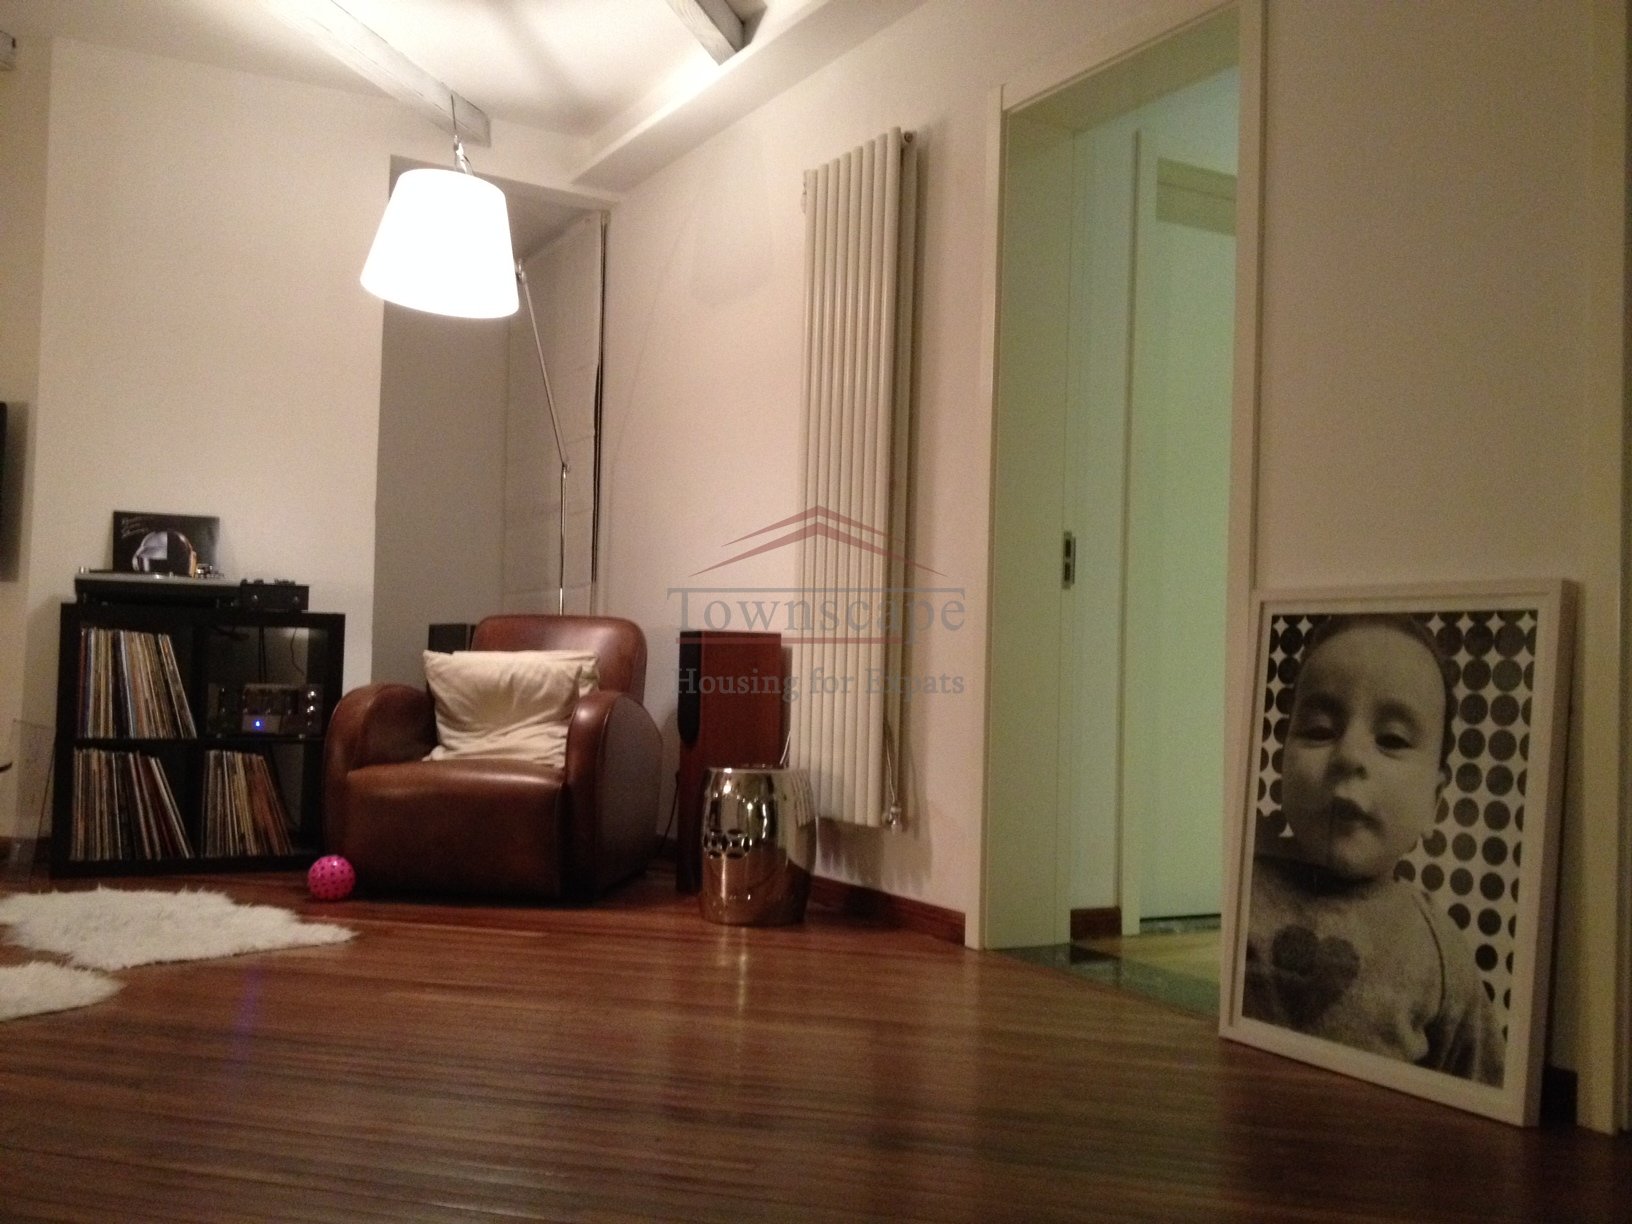 Rent in Shanghai Stunning Well Priced 4 bed apartment in French Concession